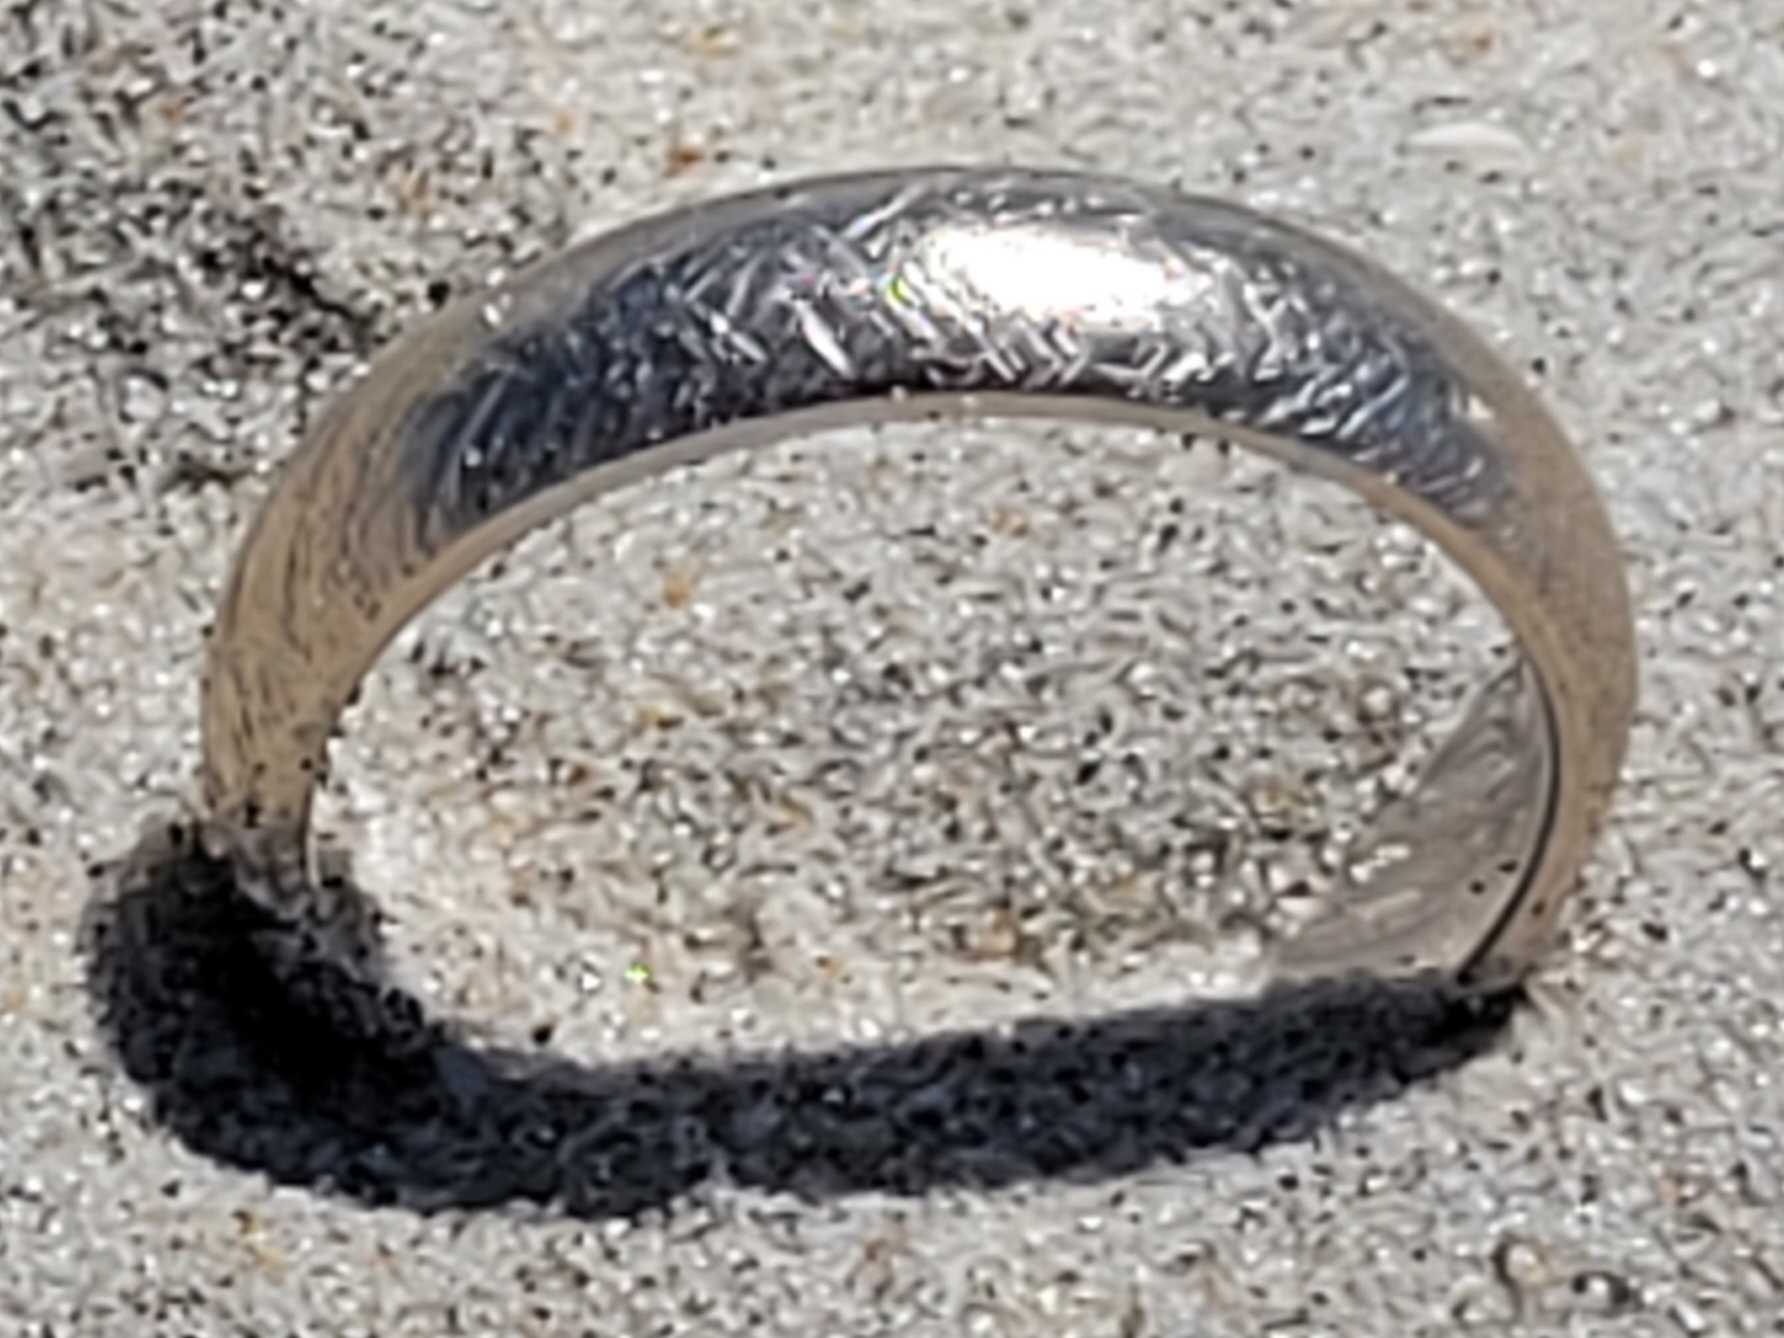 Avalon New Jersey Lost Ring Finder